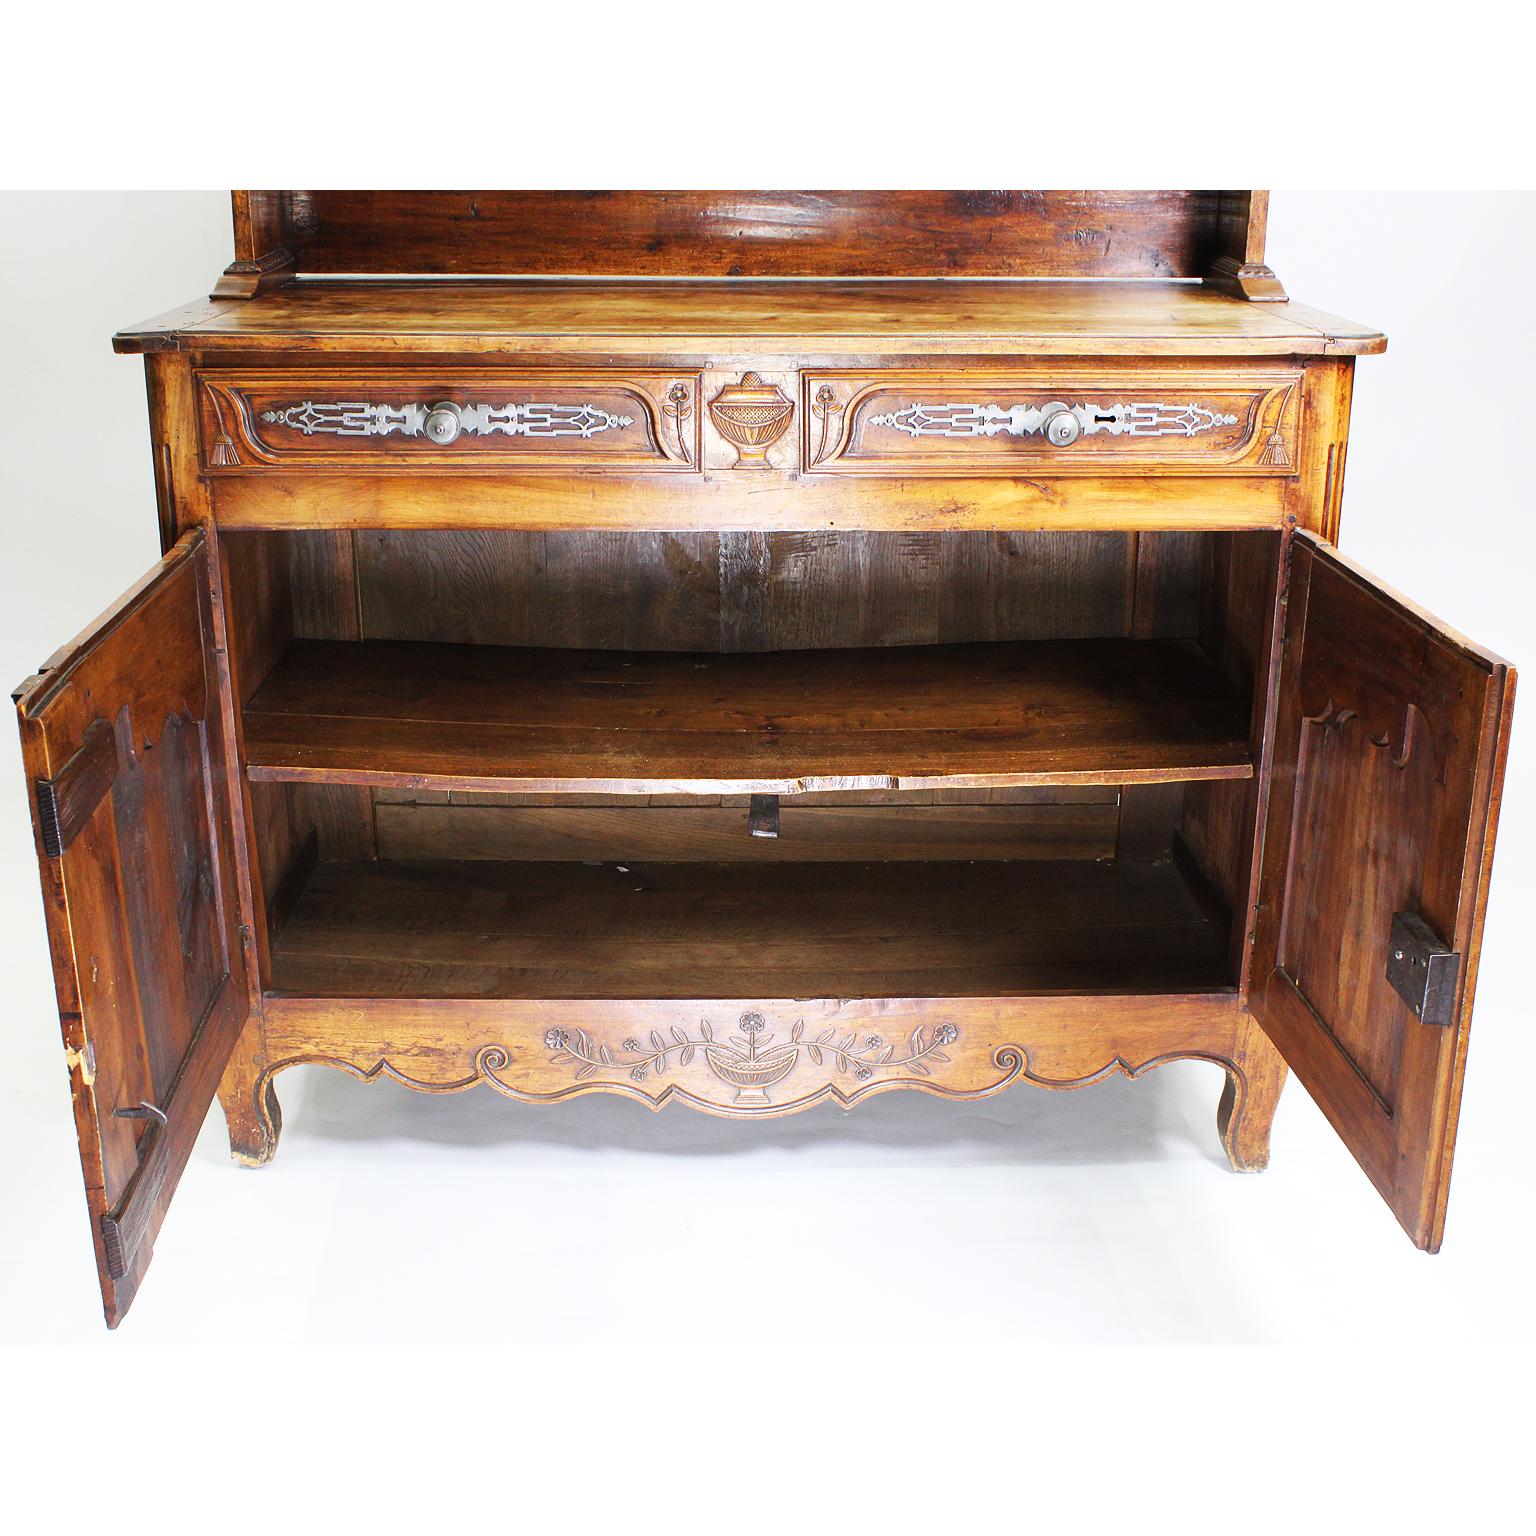 Metal A French 18th-19th C. Provincial Louis  XV Style Walnut Vaisselier Hutch Buffet For Sale